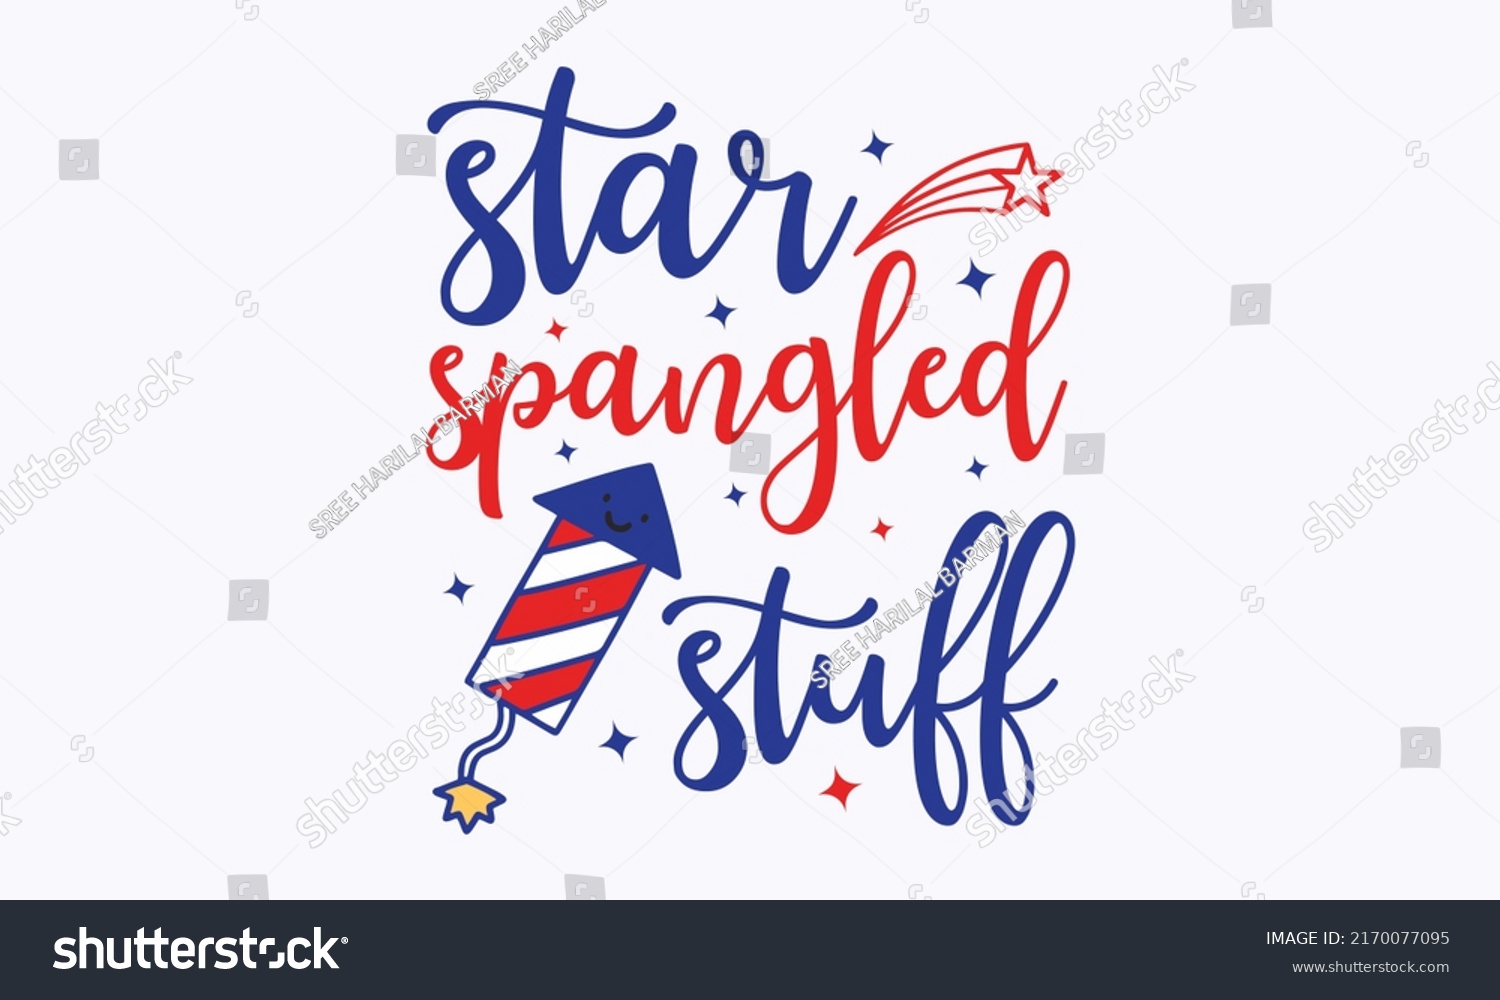 SVG of star spangled stuff - 4th of July Svg vector Illustration isolated on white background. Independence day party décor. 4th of July fireworks svg for design shirt and scrapbooking templet. svg